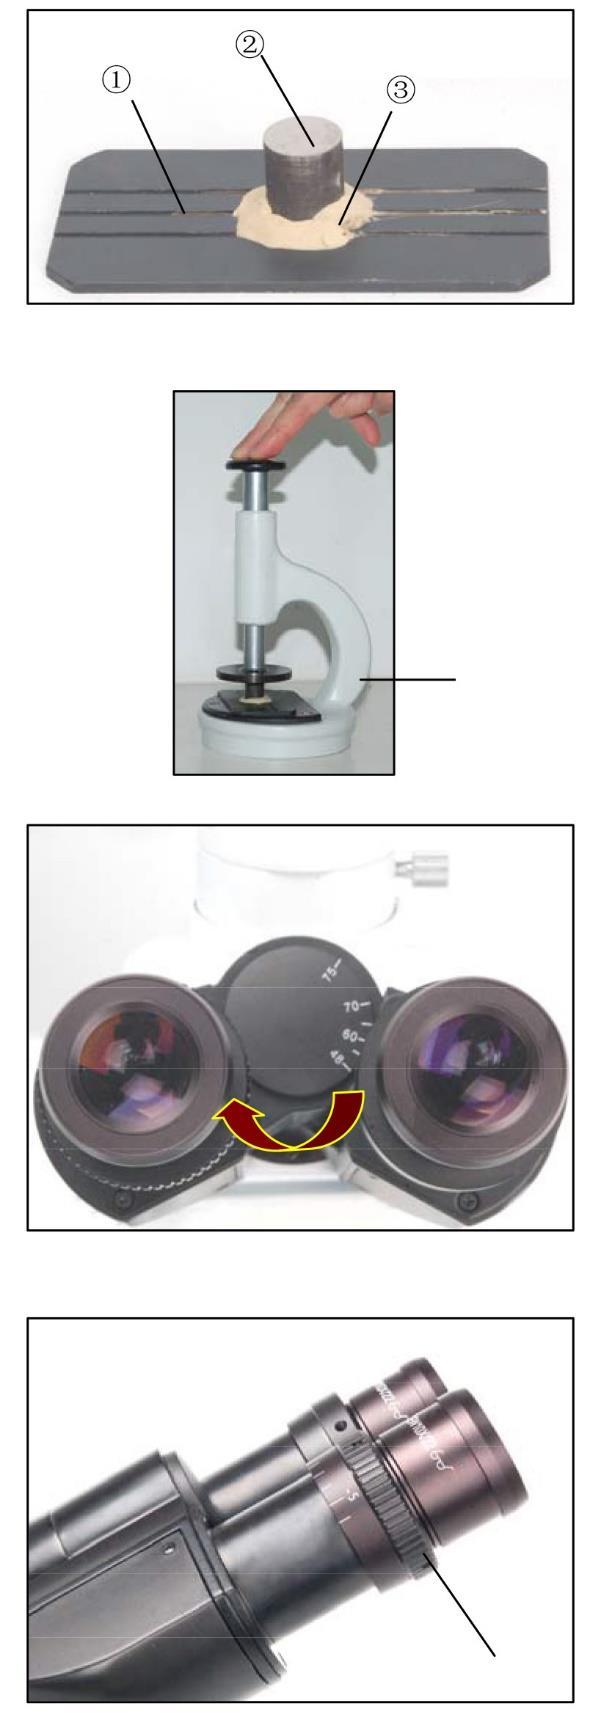 10 Fig. 18 3.4. Turning on the Lamp Connect the power, press the main switch 1 to the I (on) position.